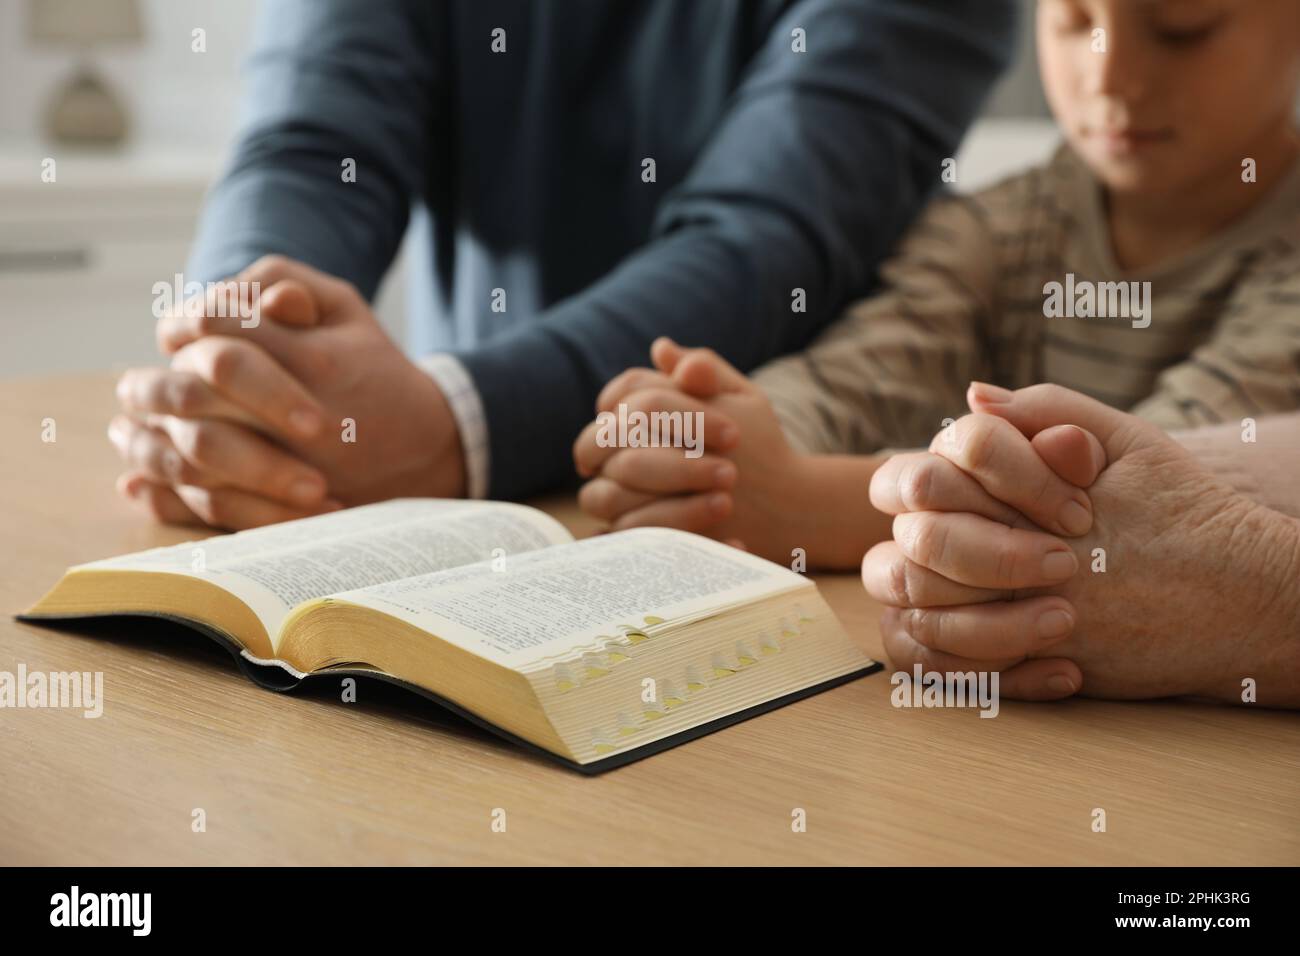 Boy and his godparents praying together at wooden table indoors, closeup Stock Photo